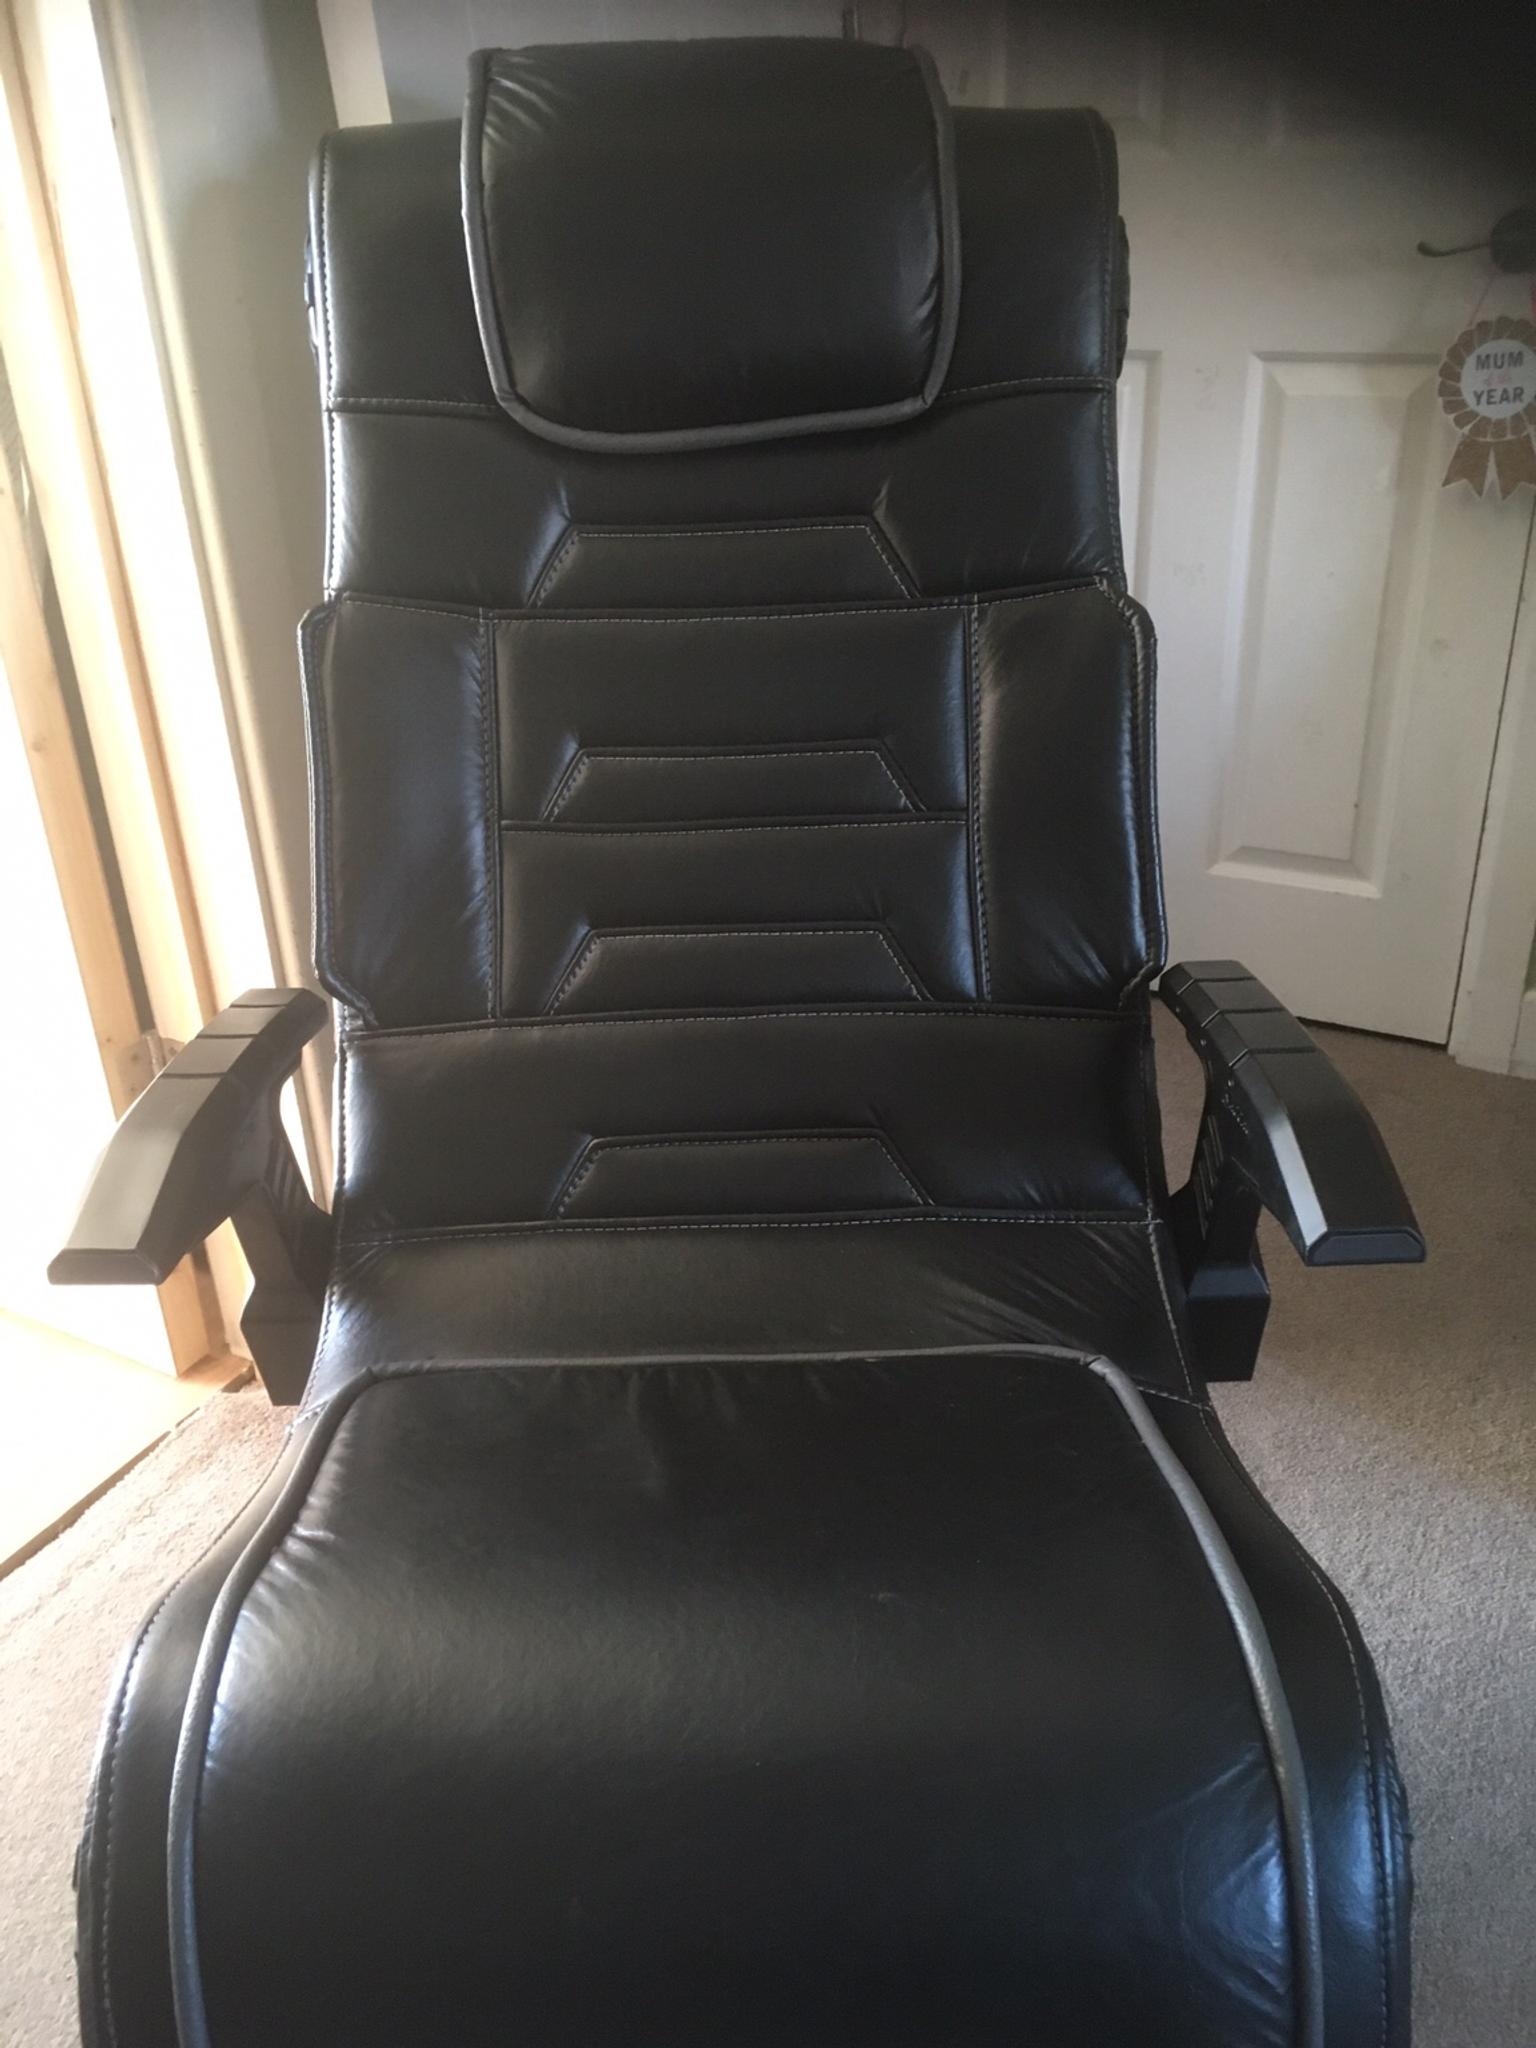 X Rocker Gaming Chair Bargain In W13 London For 50 00 For Sale